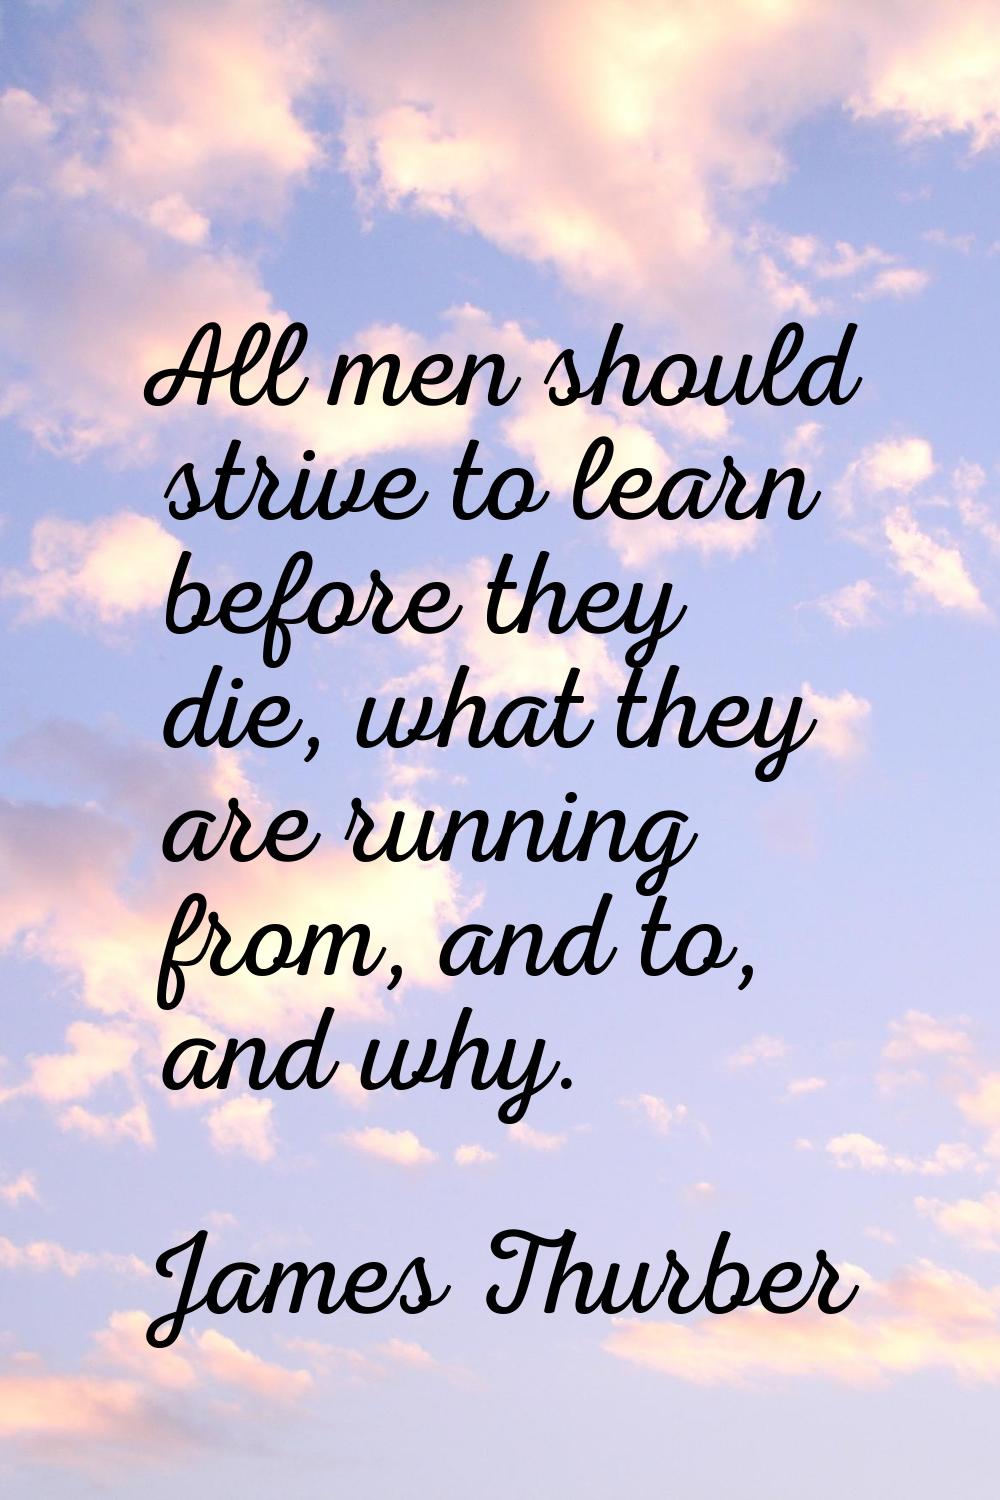 All men should strive to learn before they die, what they are running from, and to, and why.